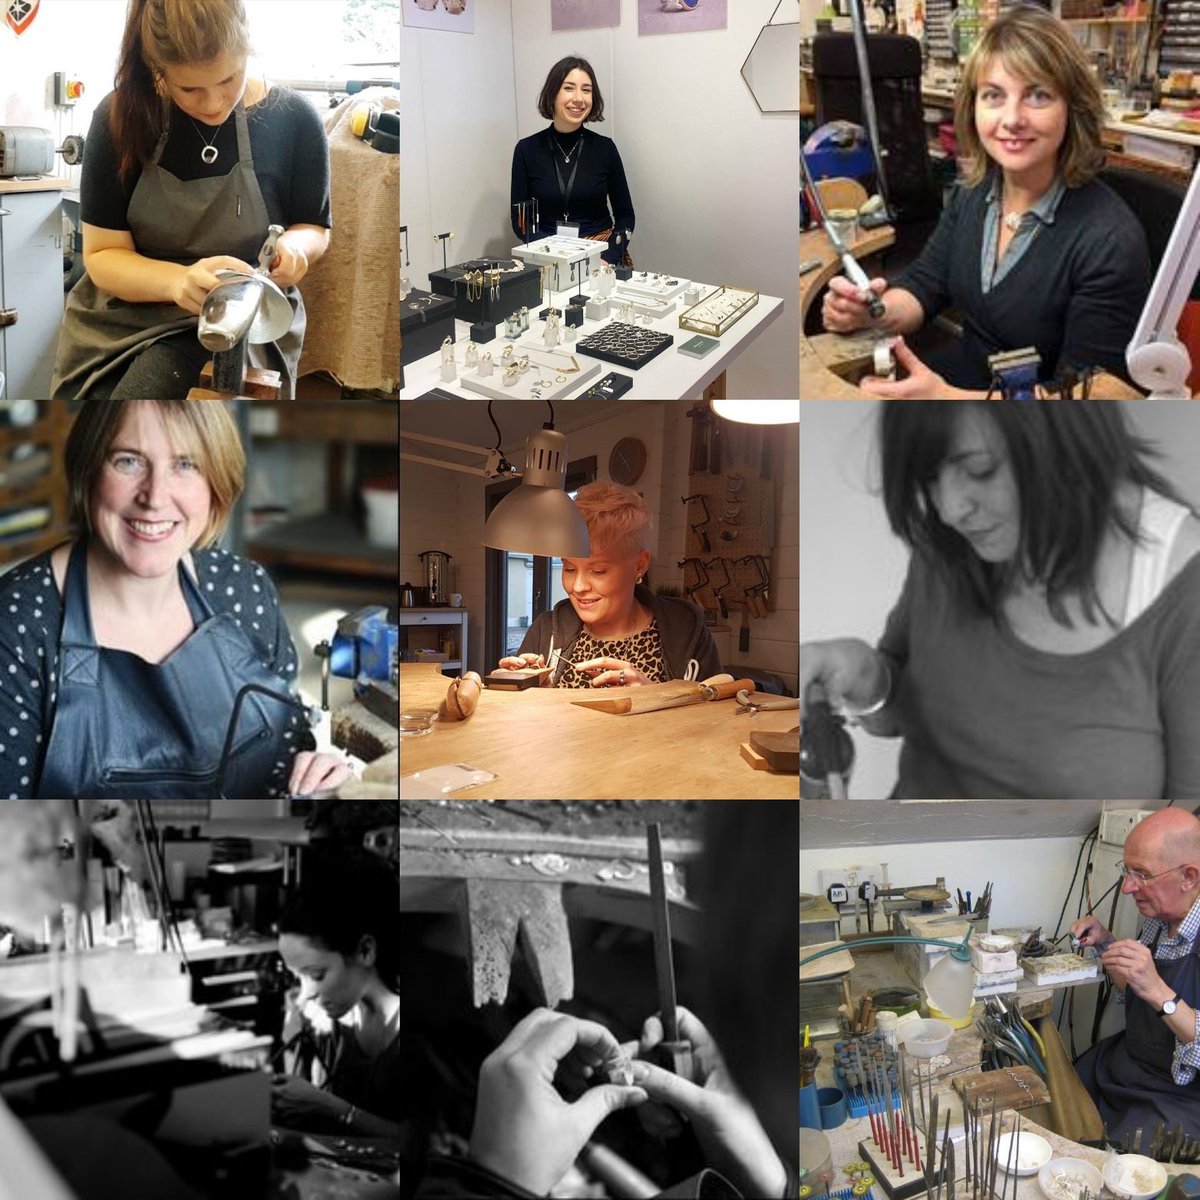 #MeetourJewellers We have a wide range of jewellery created by eighteen of the finest Jewellers in Wales. Each peice they make is handmade with quality and care. Starting from £15 there really is something for everyone! Available in the gallery and online buff.ly/3x57KWI